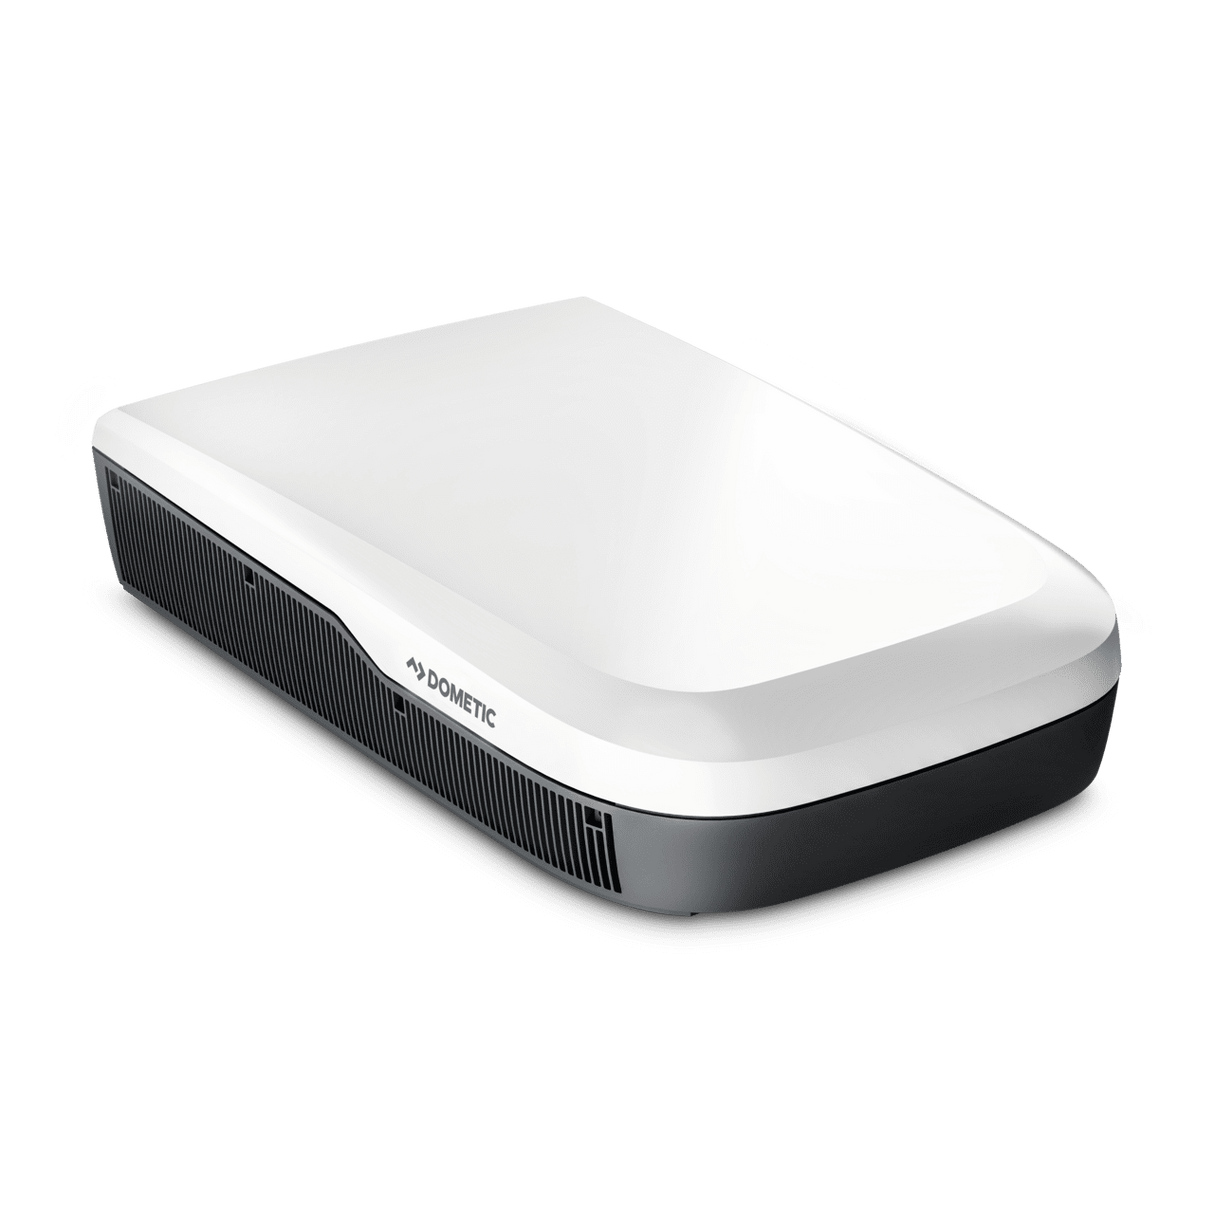 Dometic FreshJet 7 Series Pro Roof Top Air Conditioner (2.9kW Cool / 2.6kW Heat - 242mm High - 41kg)